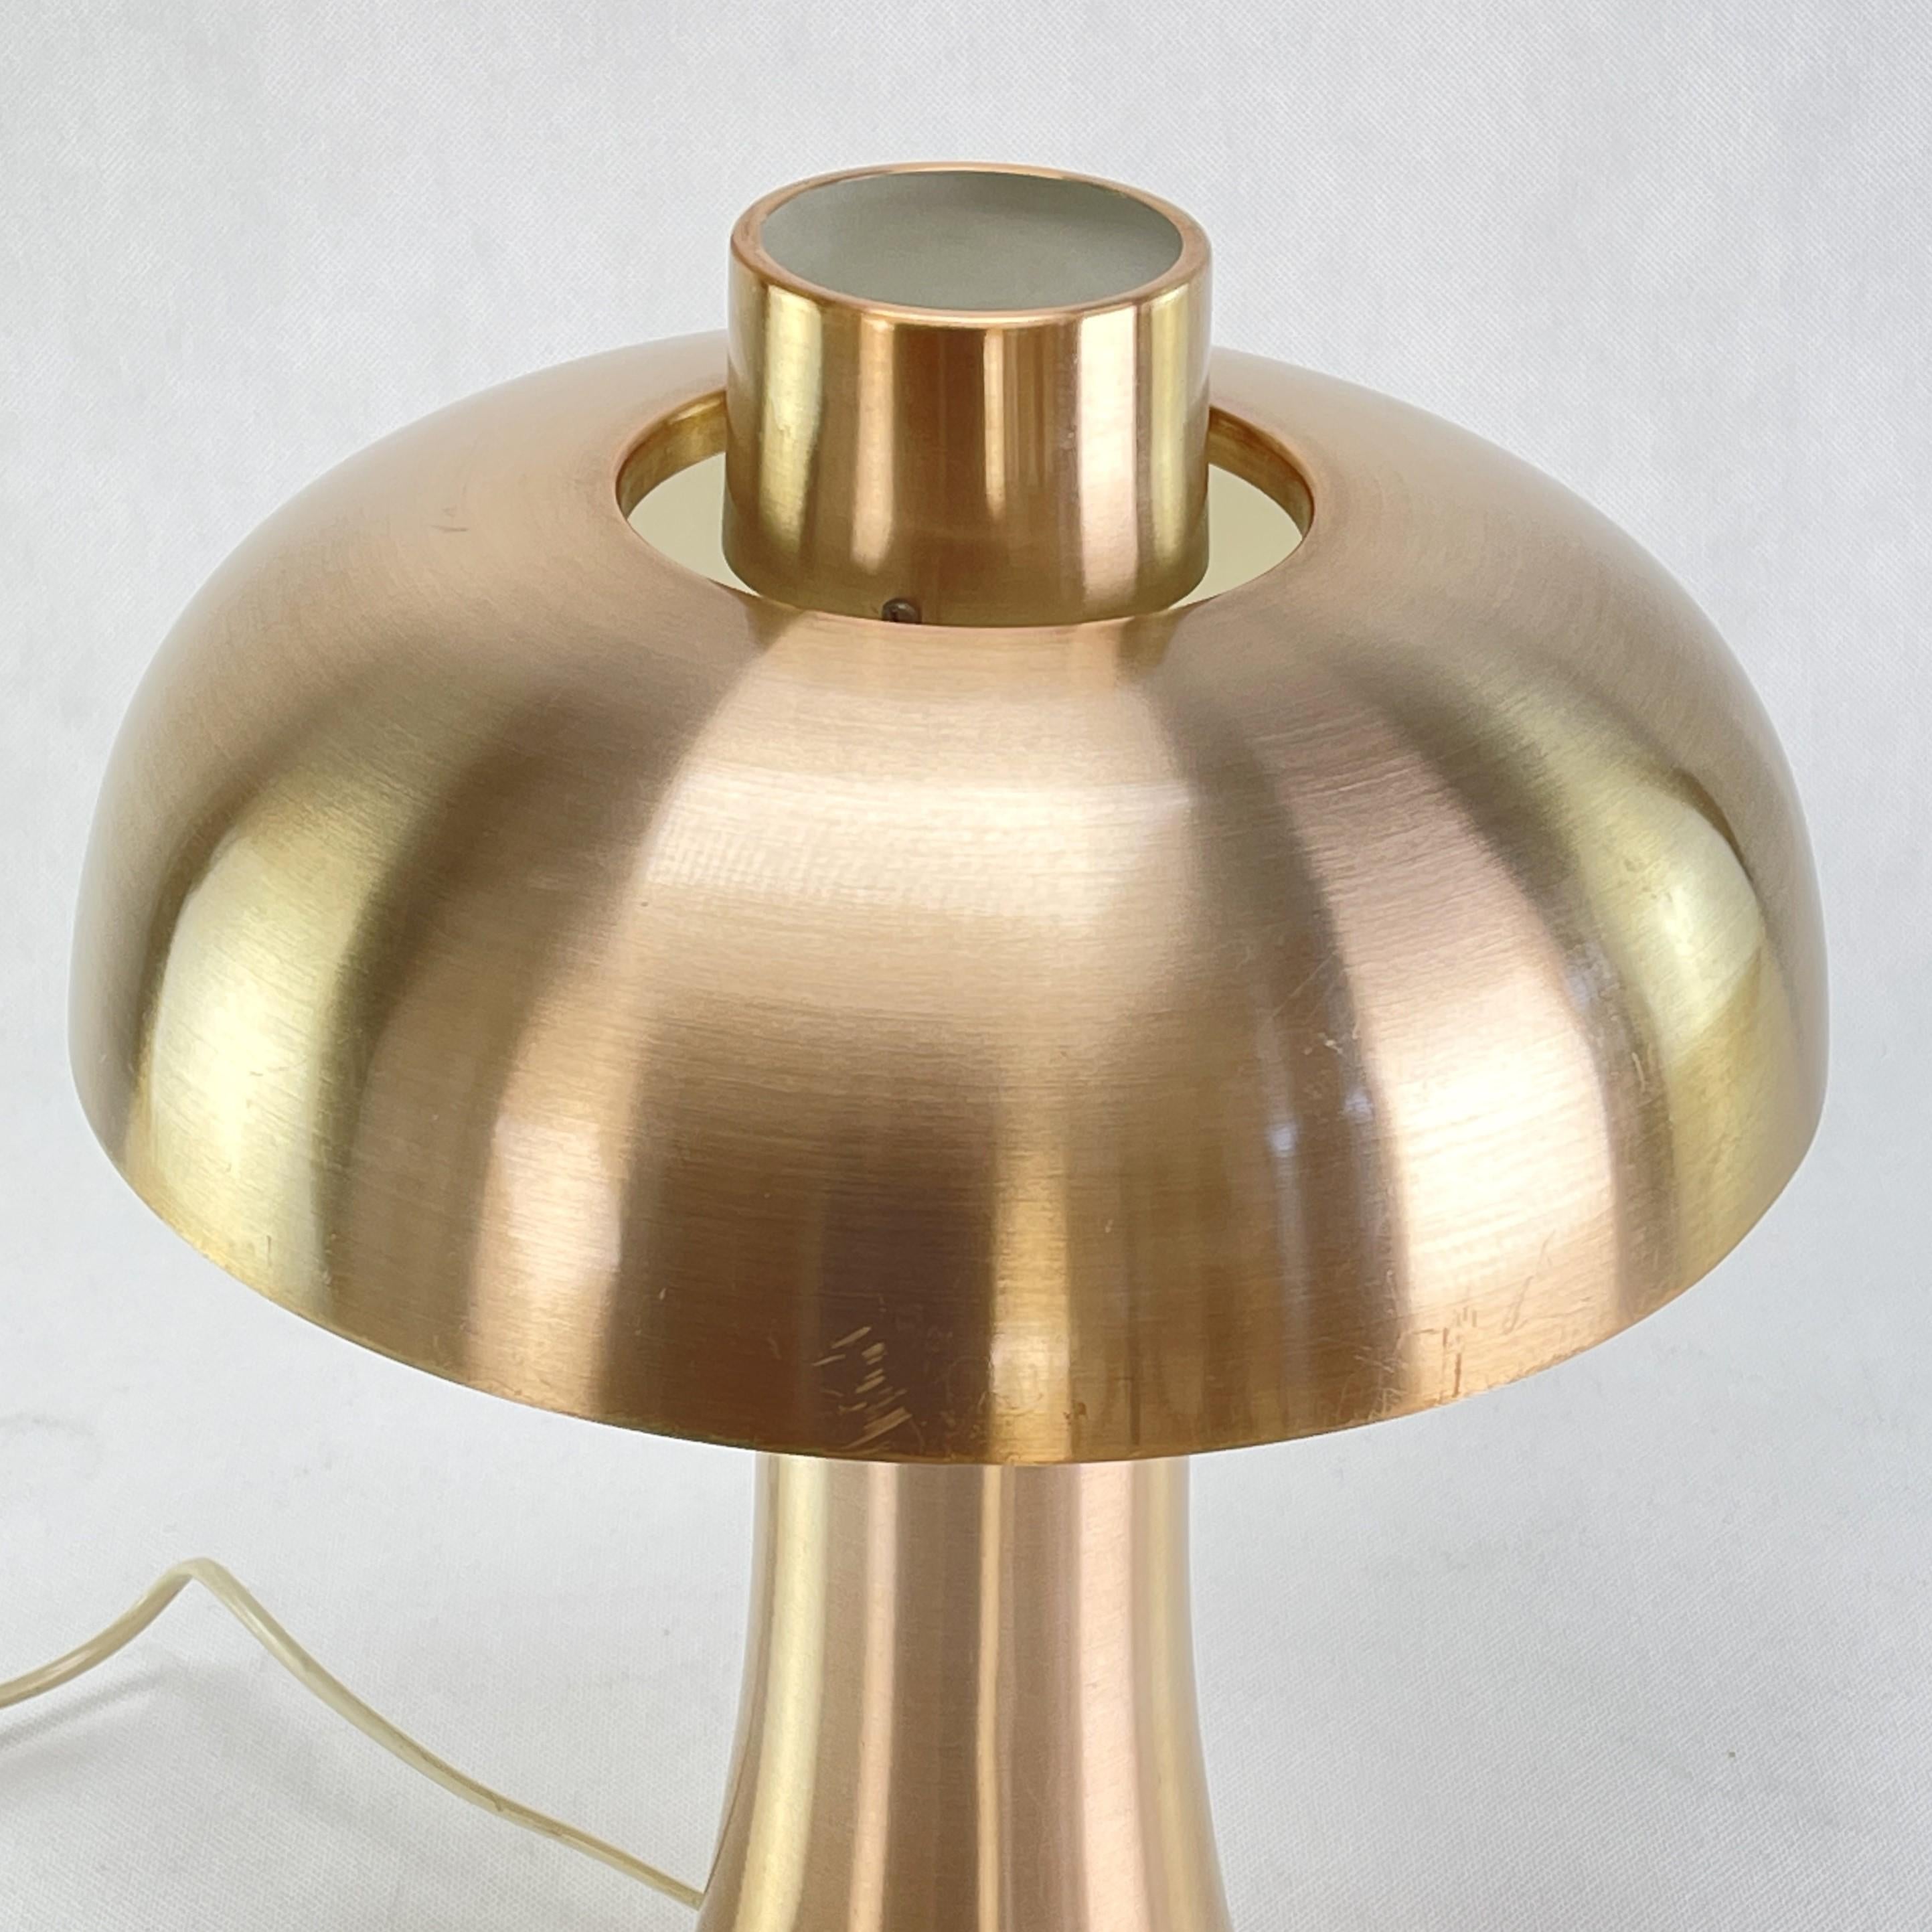 Space Age  Table Mushroom Lamp, Copper-Coloured by DORIA, 1970s For Sale